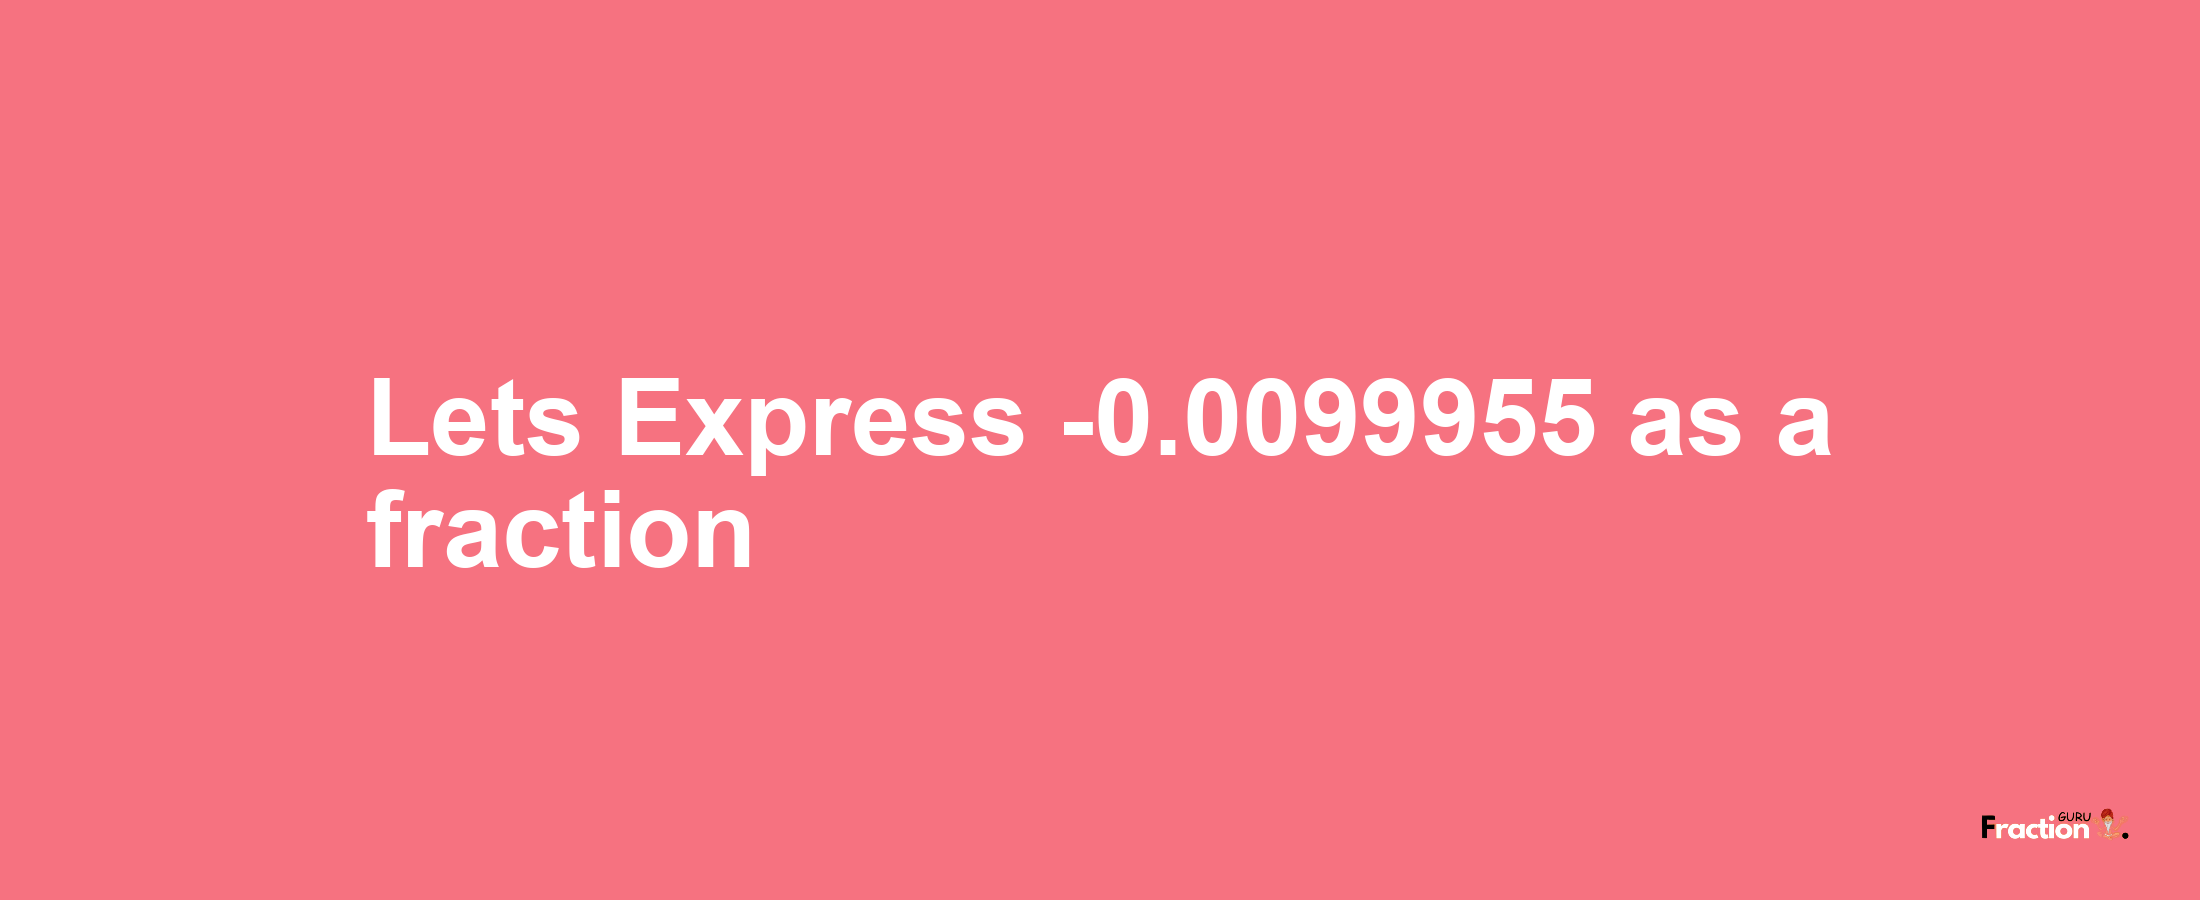 Lets Express -0.0099955 as afraction